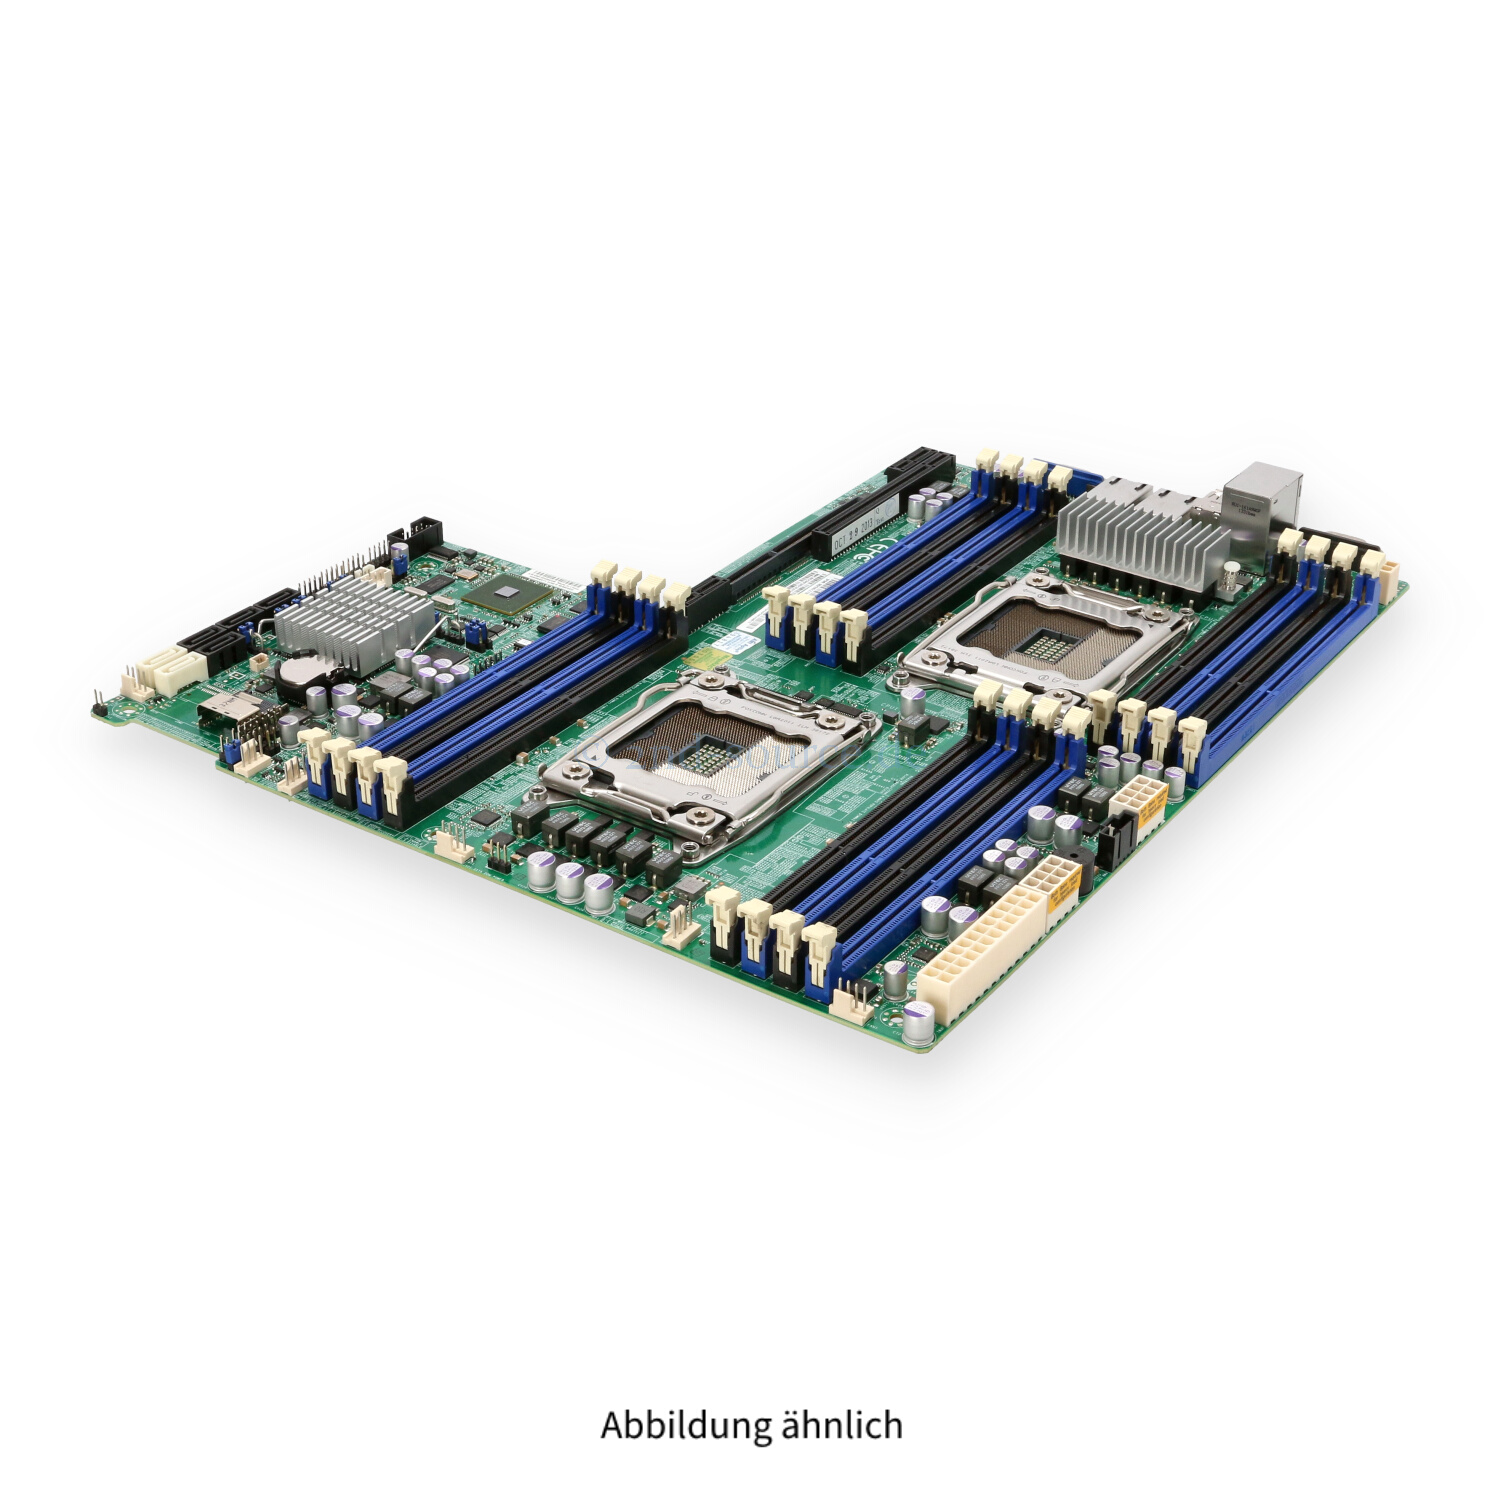 Supermicro Systemboard X9DRW-iF MBD-X9DRW-iF